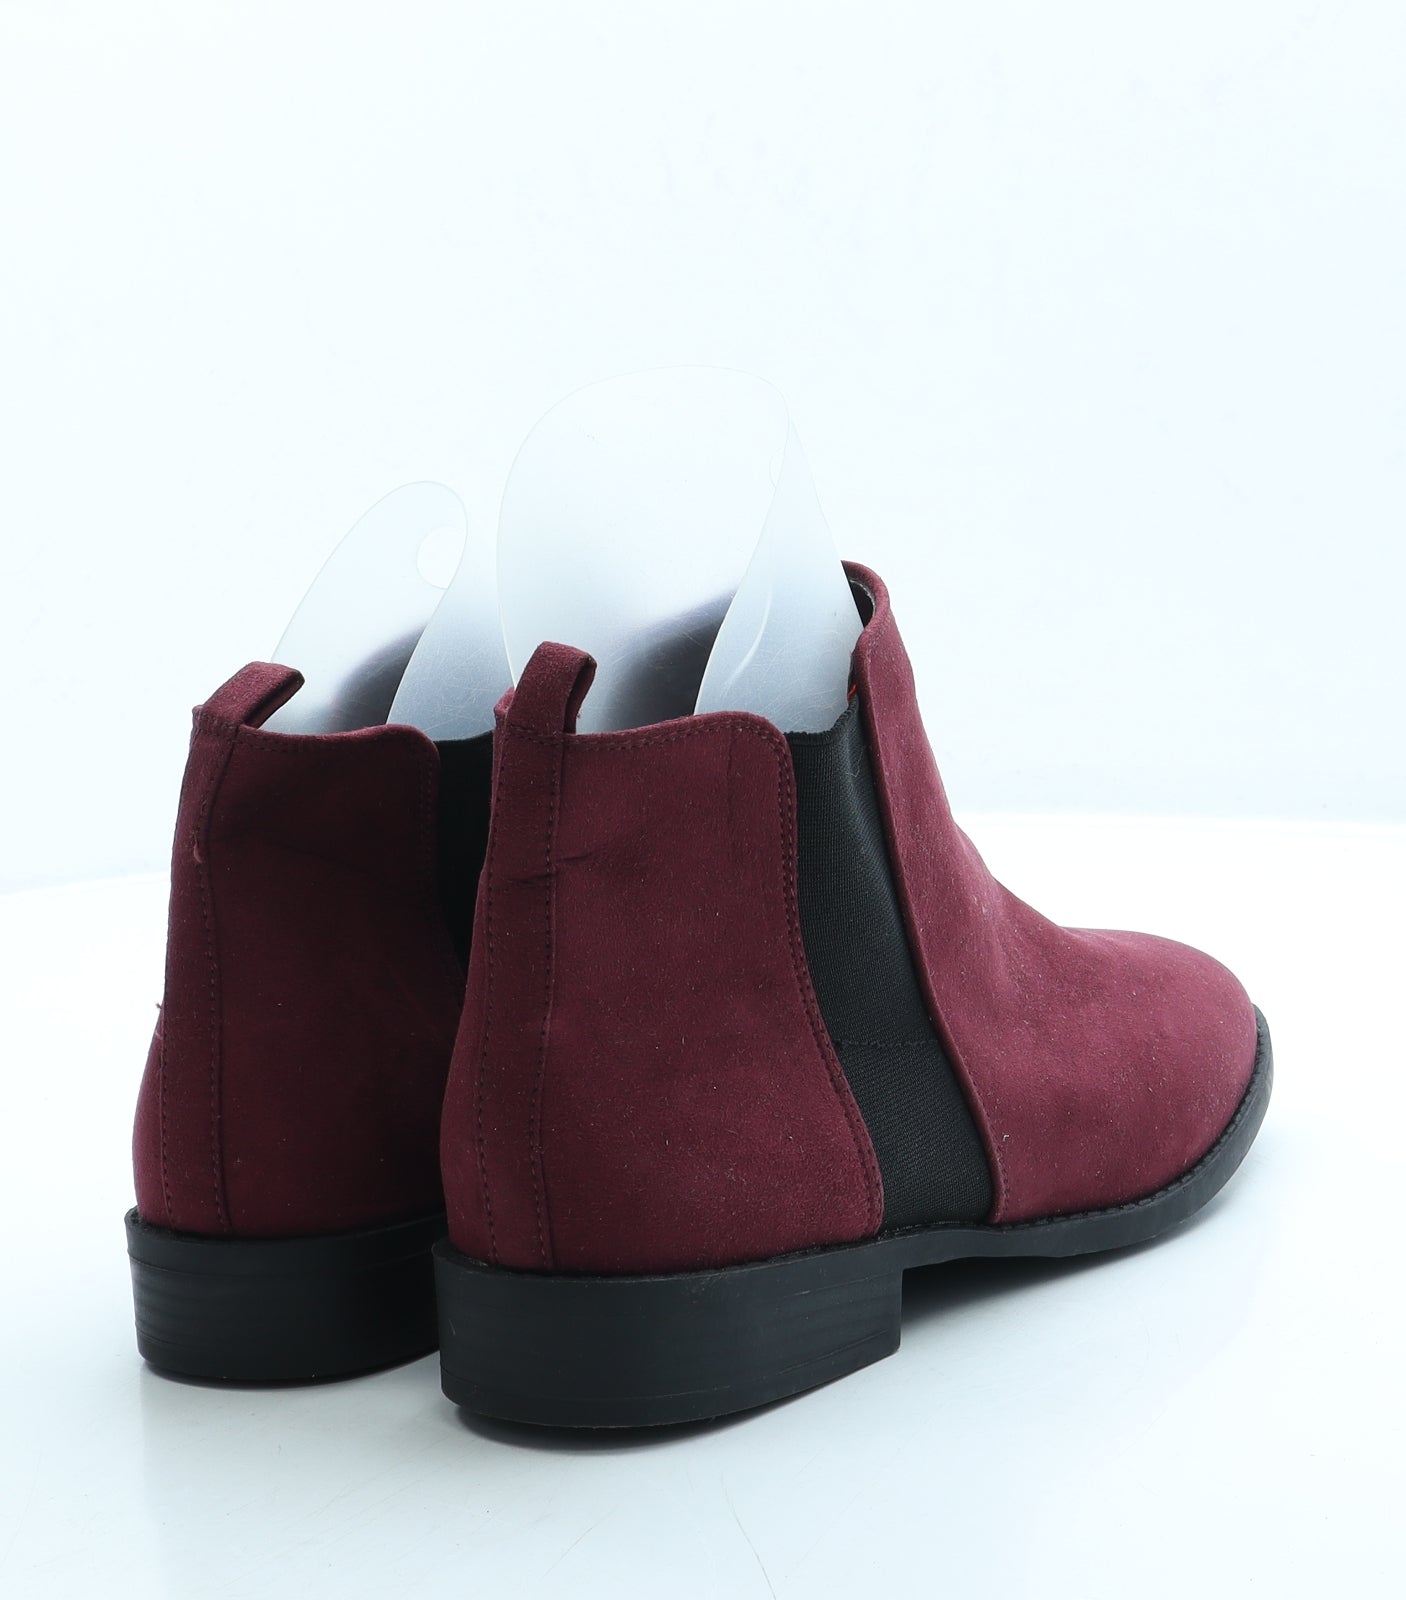 Primark Womens Red Suede Chelsea Boot UK 9 42 US 11 - Wide Fit